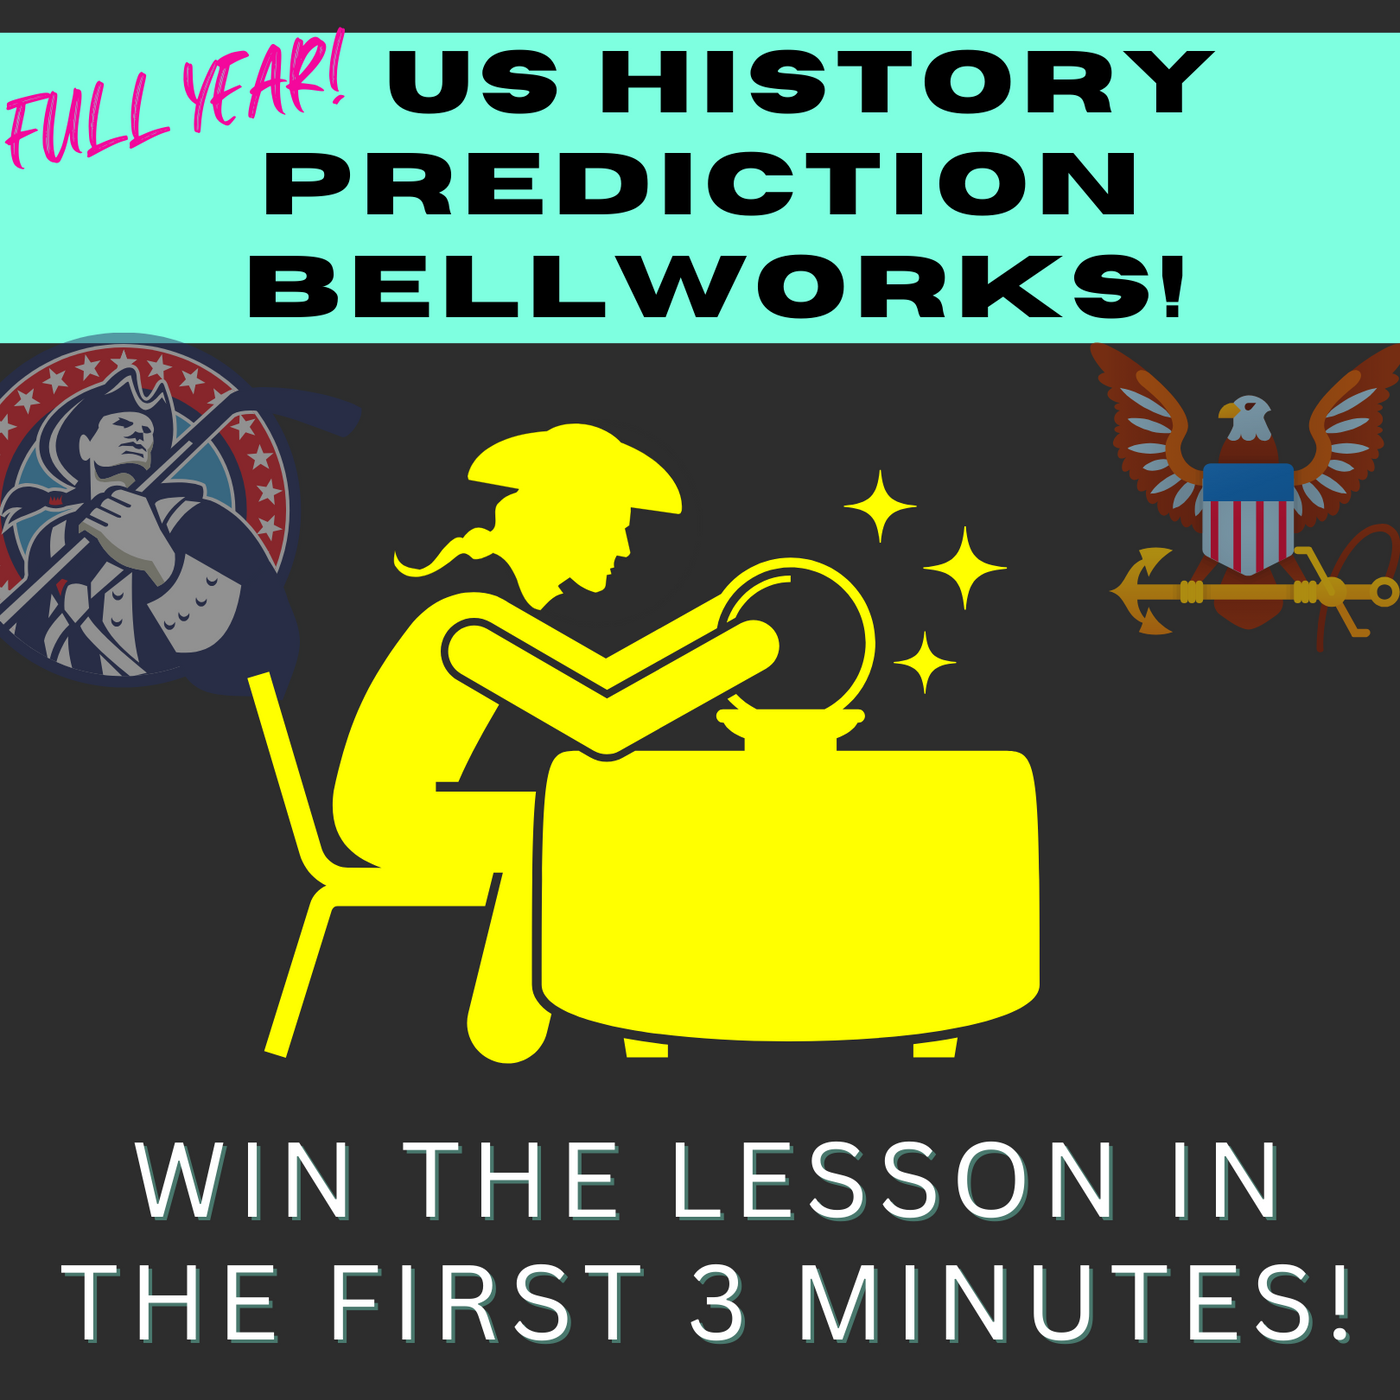 Full year us history bellworks